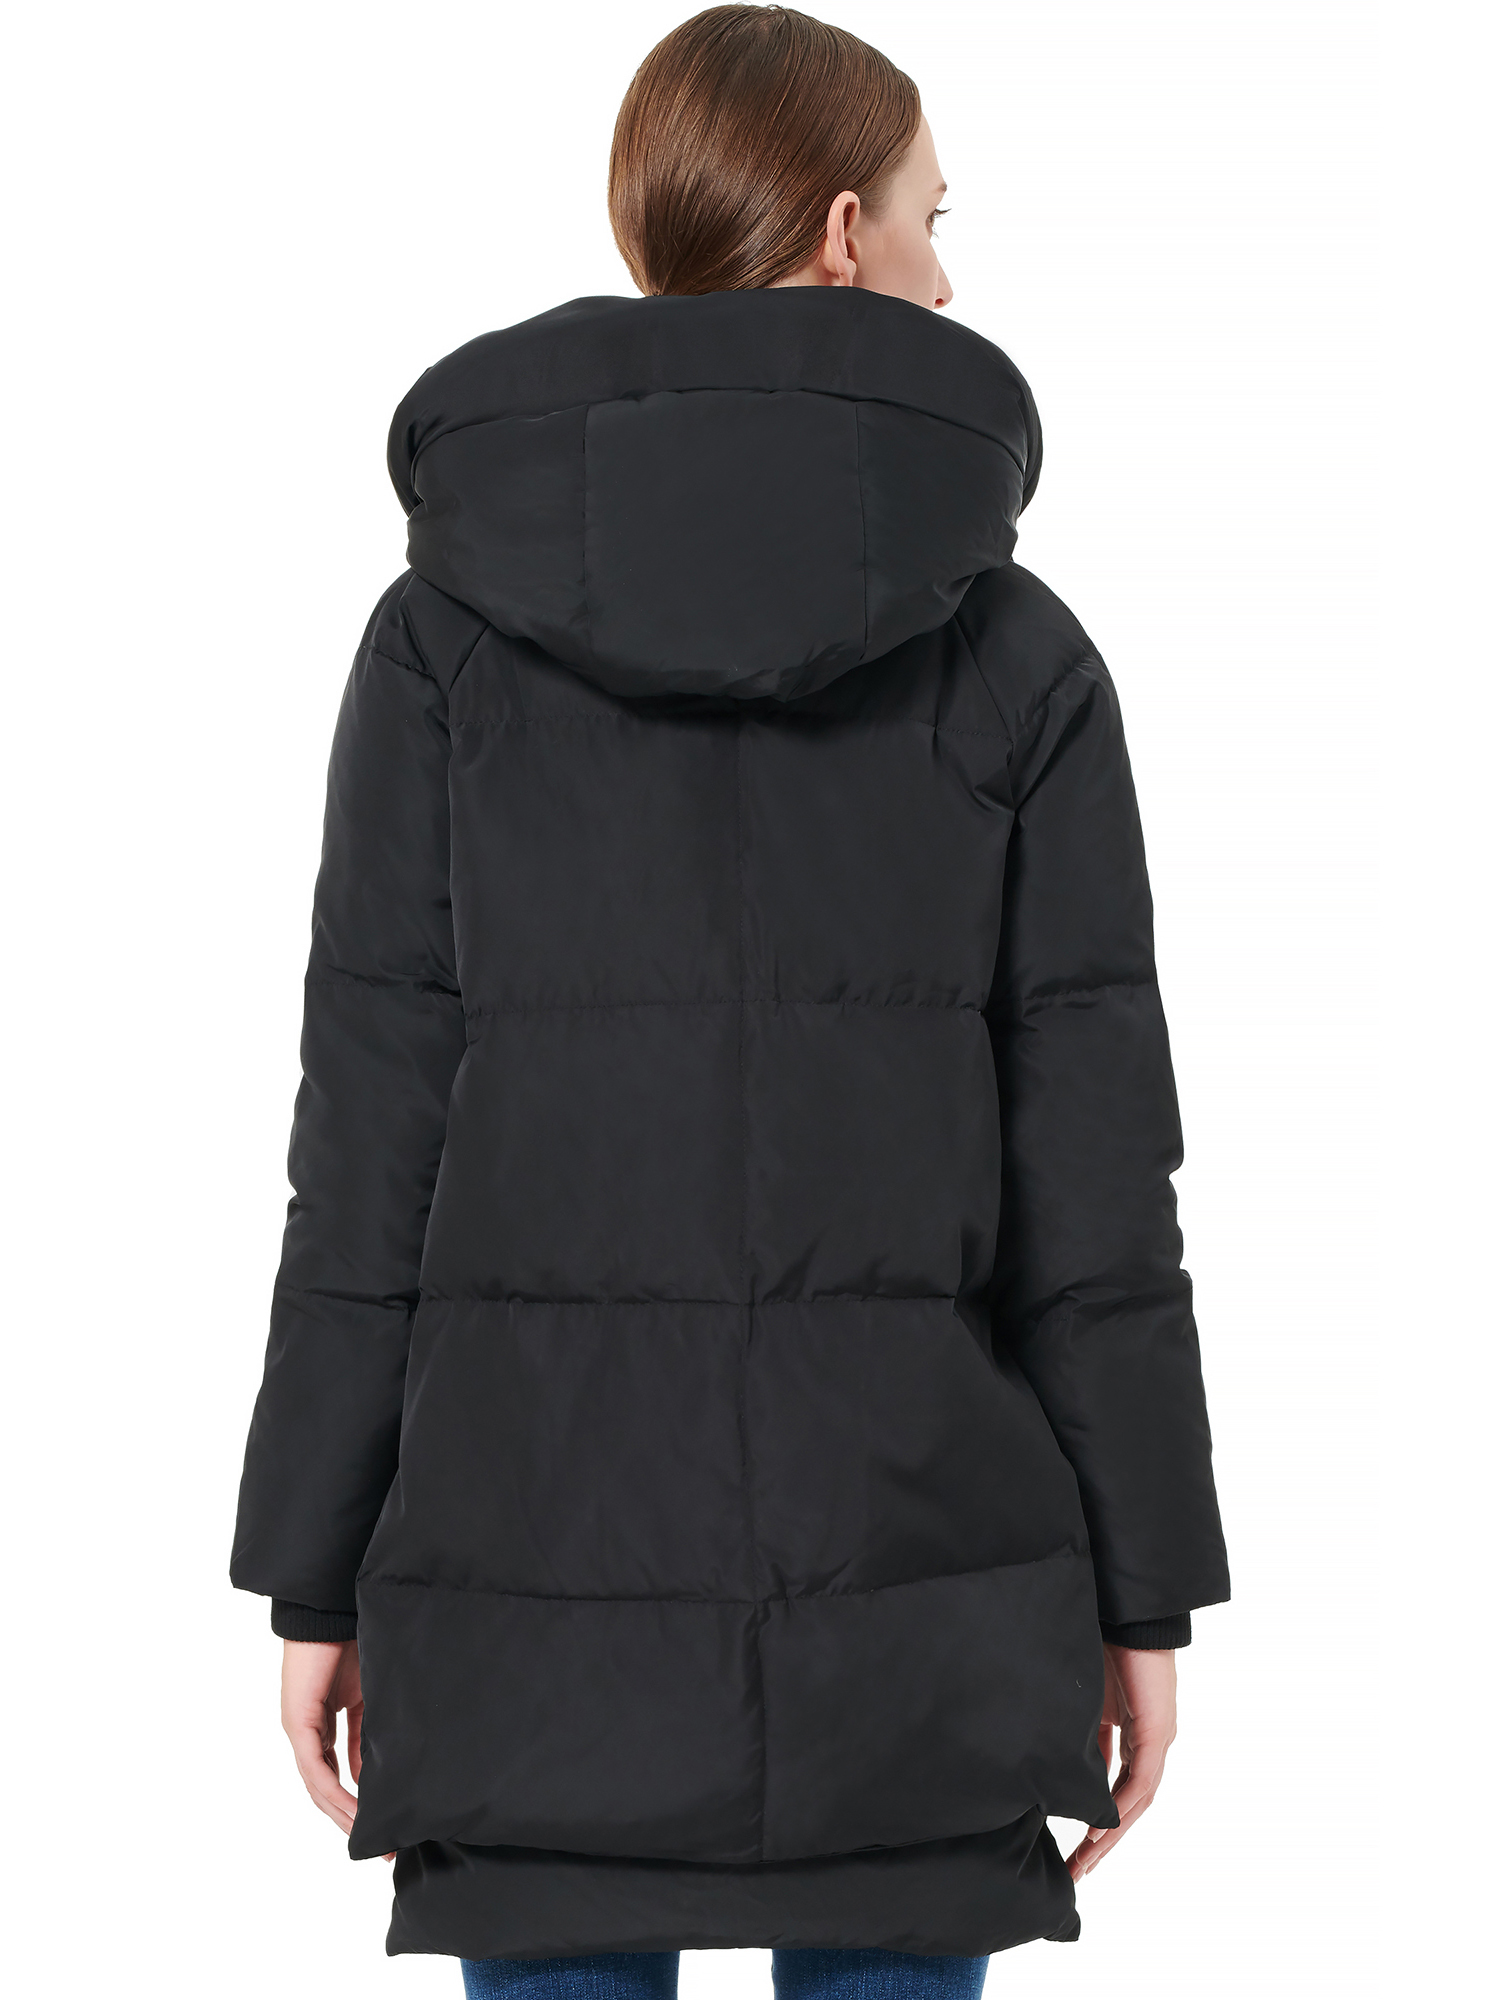 Orolay Women's Winter Coat Warm Thickened Puffer Down Jacket - image 2 of 5